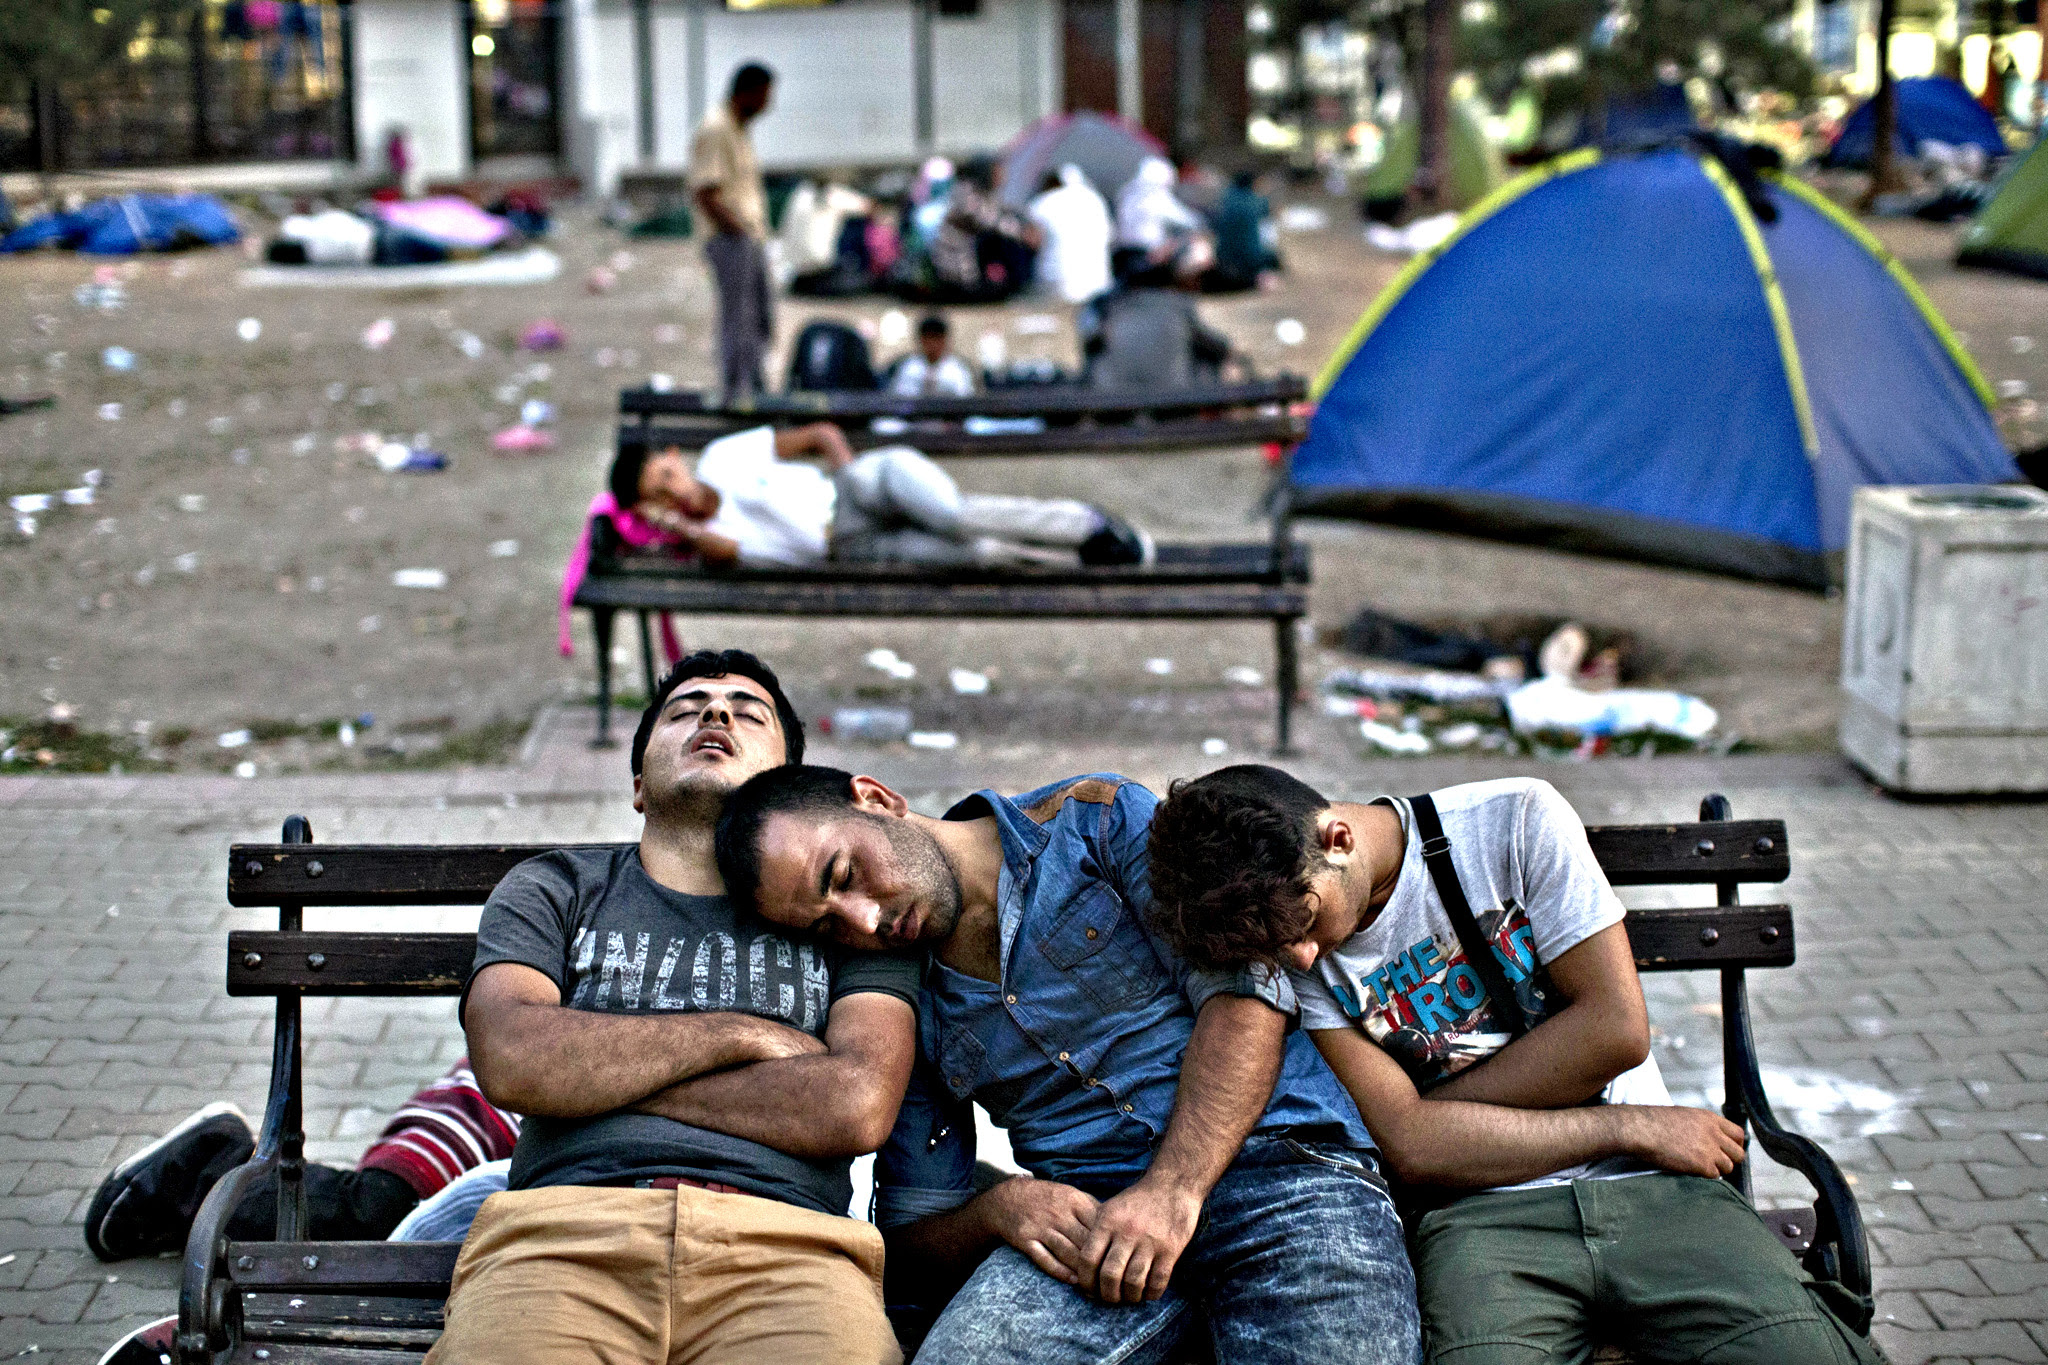 Migrants sleep on a bench at a park in Belgrade, Serbia, Friday, Aug. 28, 2015. Over 10,000 migrants, including many women with babies and small children, have crossed into Serbia over the past few days and headed toward Hungary and the EU Schengen Area, a zone with no internal border checks between member countries